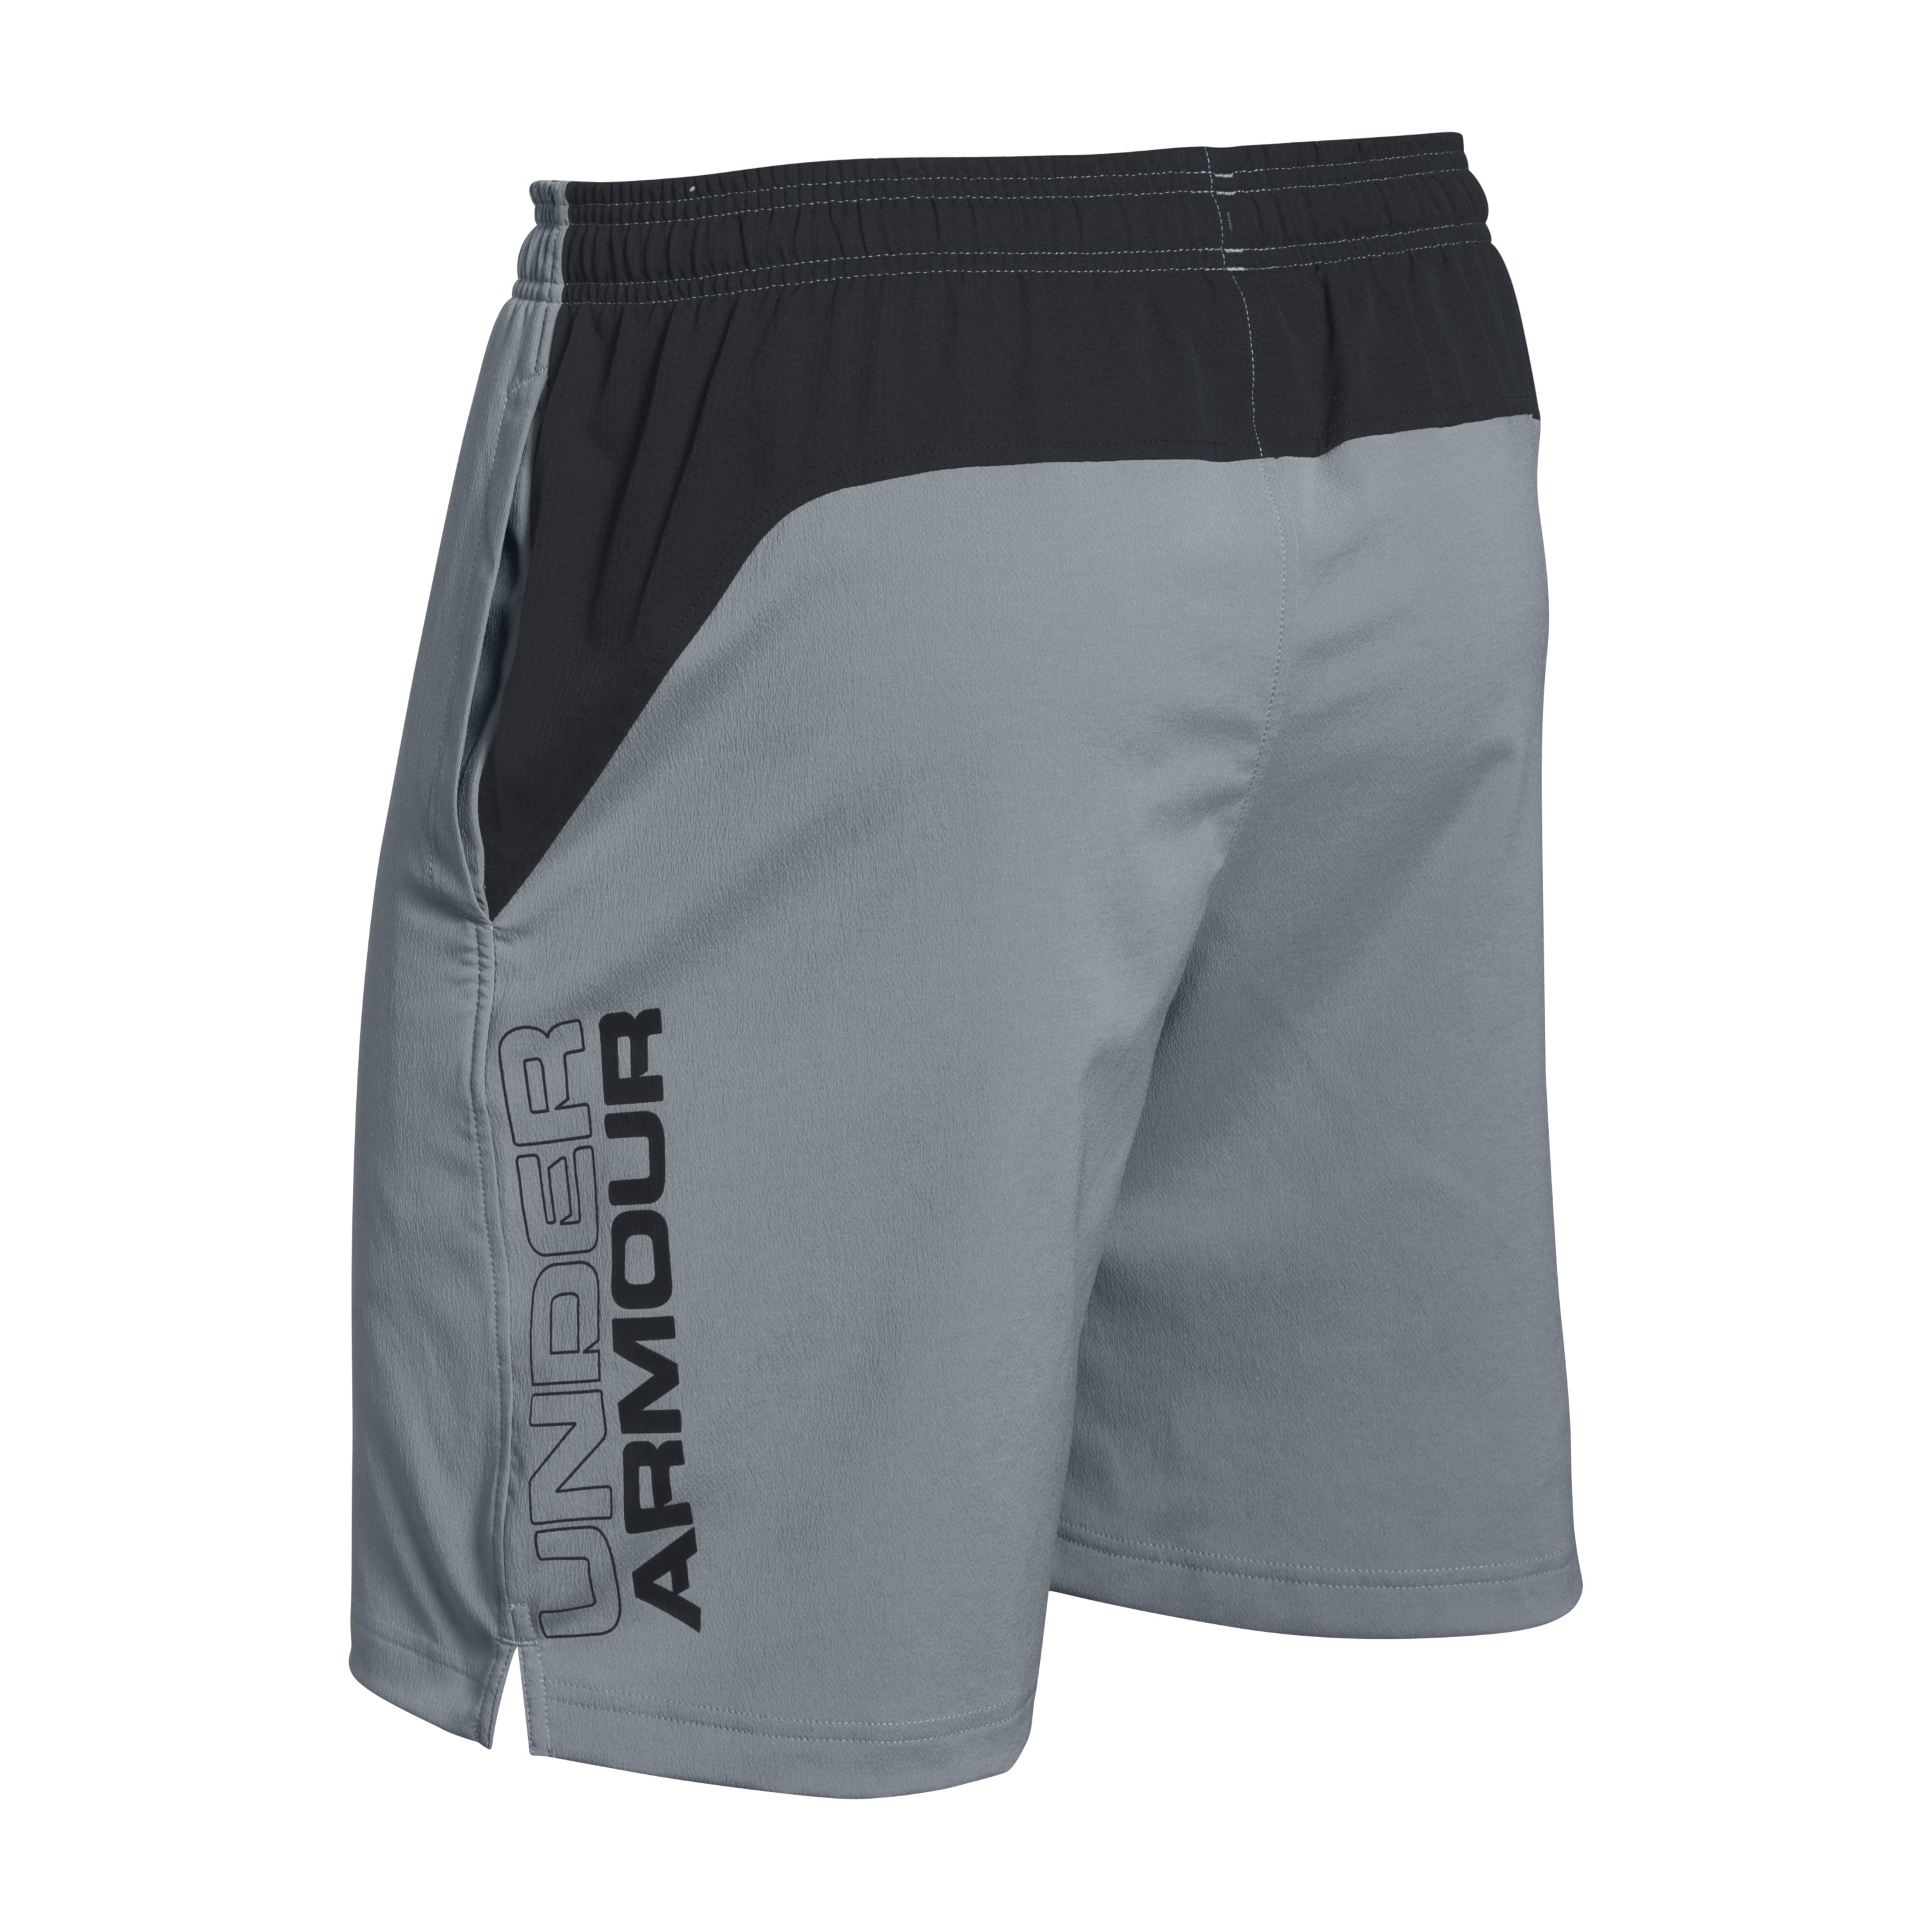 Under Armour Short Hiit Woven gray/black